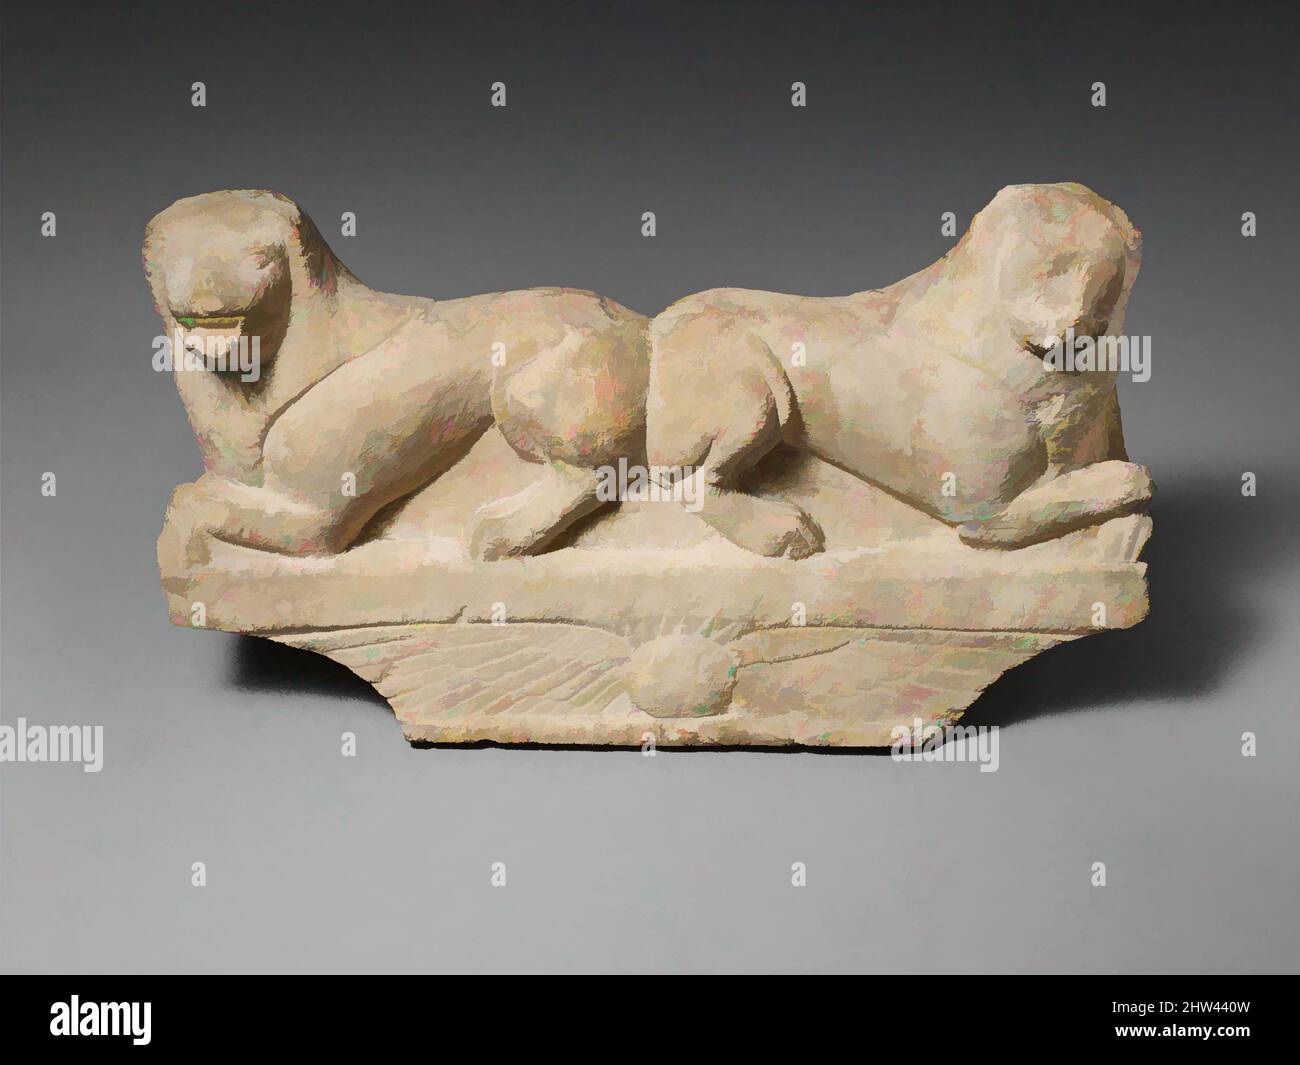 Art inspired by Limestone finial of a funerary stele with two recumbent lions, Archaic, late 6th or early 5th century B.C., Cypriot, Limestone, Overall: 13 1/4 x 24 1/2 x 7 in. (33.7 x 62.2 x 17.8 cm), Stone Sculpture, The cavetto finial is decorated with a winged disk; on the, Classic works modernized by Artotop with a splash of modernity. Shapes, color and value, eye-catching visual impact on art. Emotions through freedom of artworks in a contemporary way. A timeless message pursuing a wildly creative new direction. Artists turning to the digital medium and creating the Artotop NFT Stock Photo